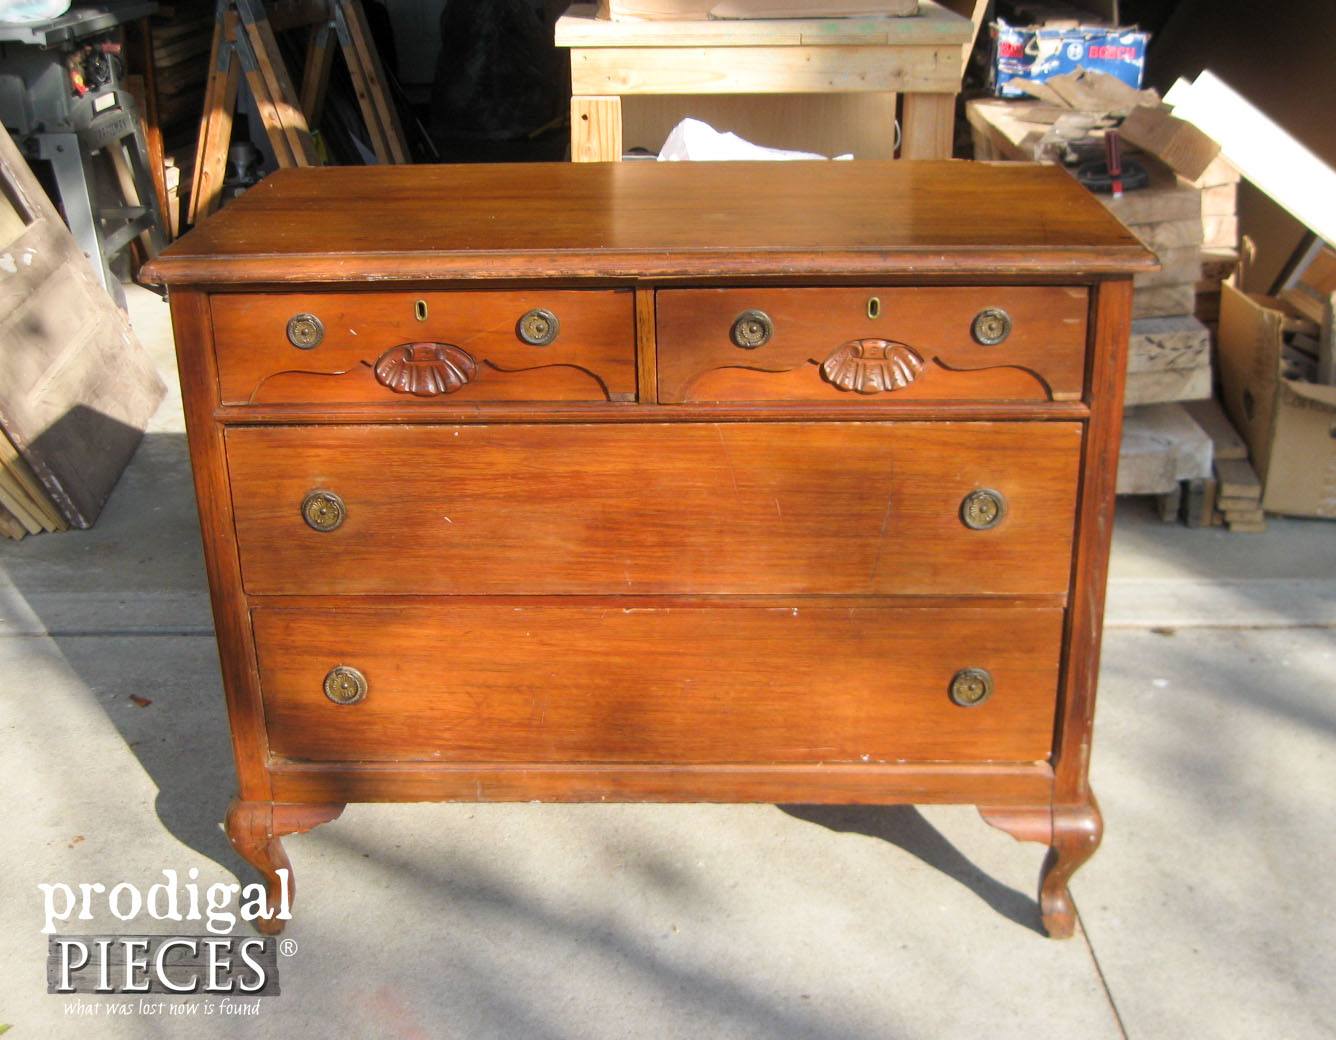 Queen Anne Dresser Before Makeover by Prodigal Pieces | www.prodigalpieces.com